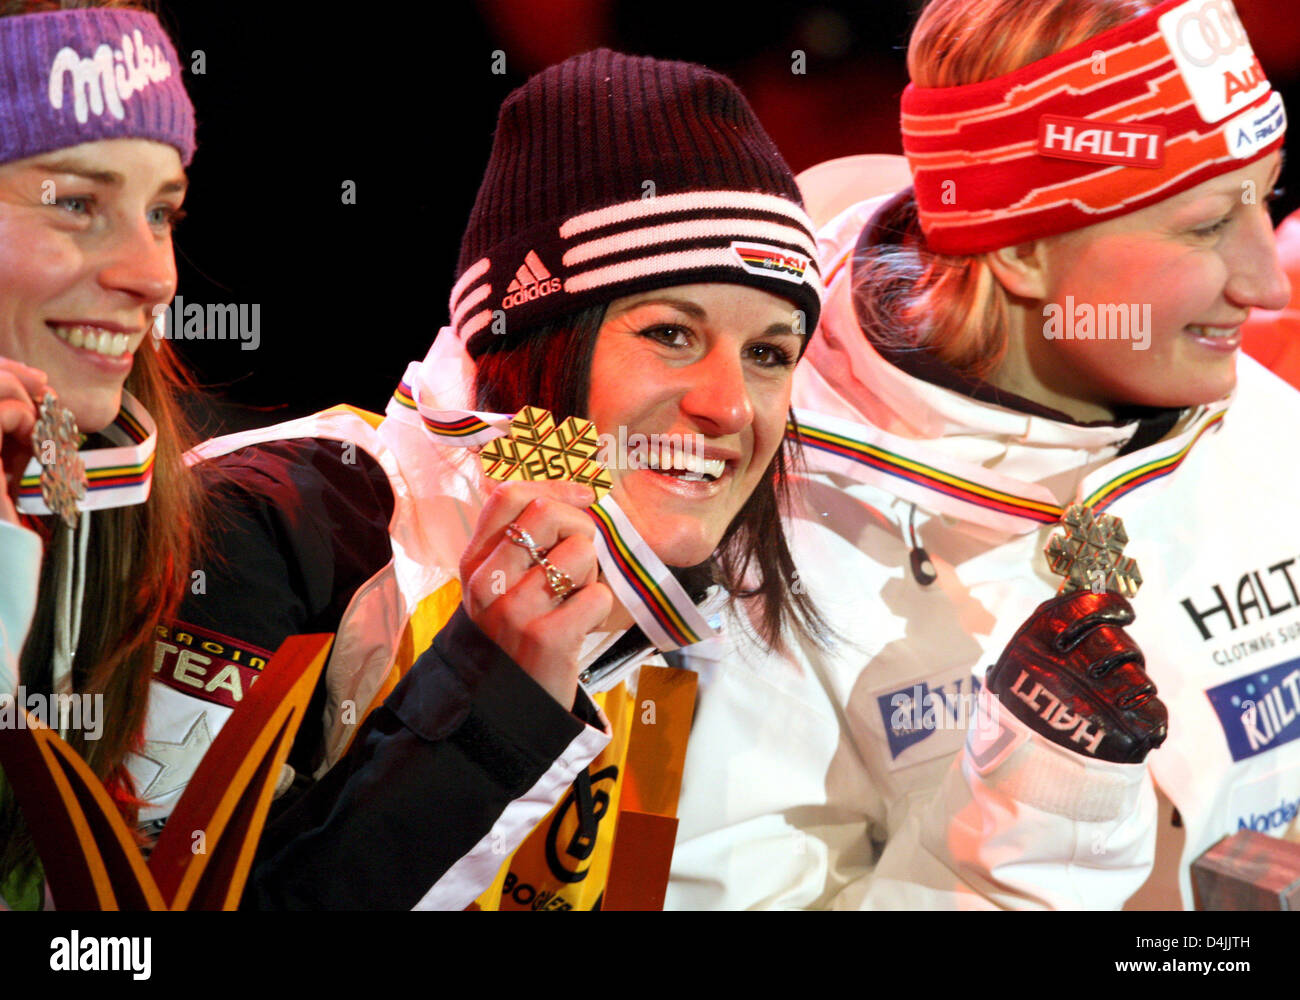 Germany?s Kathrin Hoelzl (C), Slovenia?s Tina Maze (L) and Finland?s Tanja Poutiainen pose with their medals during the award ceremony for the Women?s Giant Slalom competition during the Alpine World Ski Championships in Val d?Isere, France, 12 February 2009. Germany?s Kathrin Hoelzl is on the first place ahead of Slovenia?s Tina Maze and Finland?s Tanja Poutiainen. Photo: Karl-Jos Stock Photo